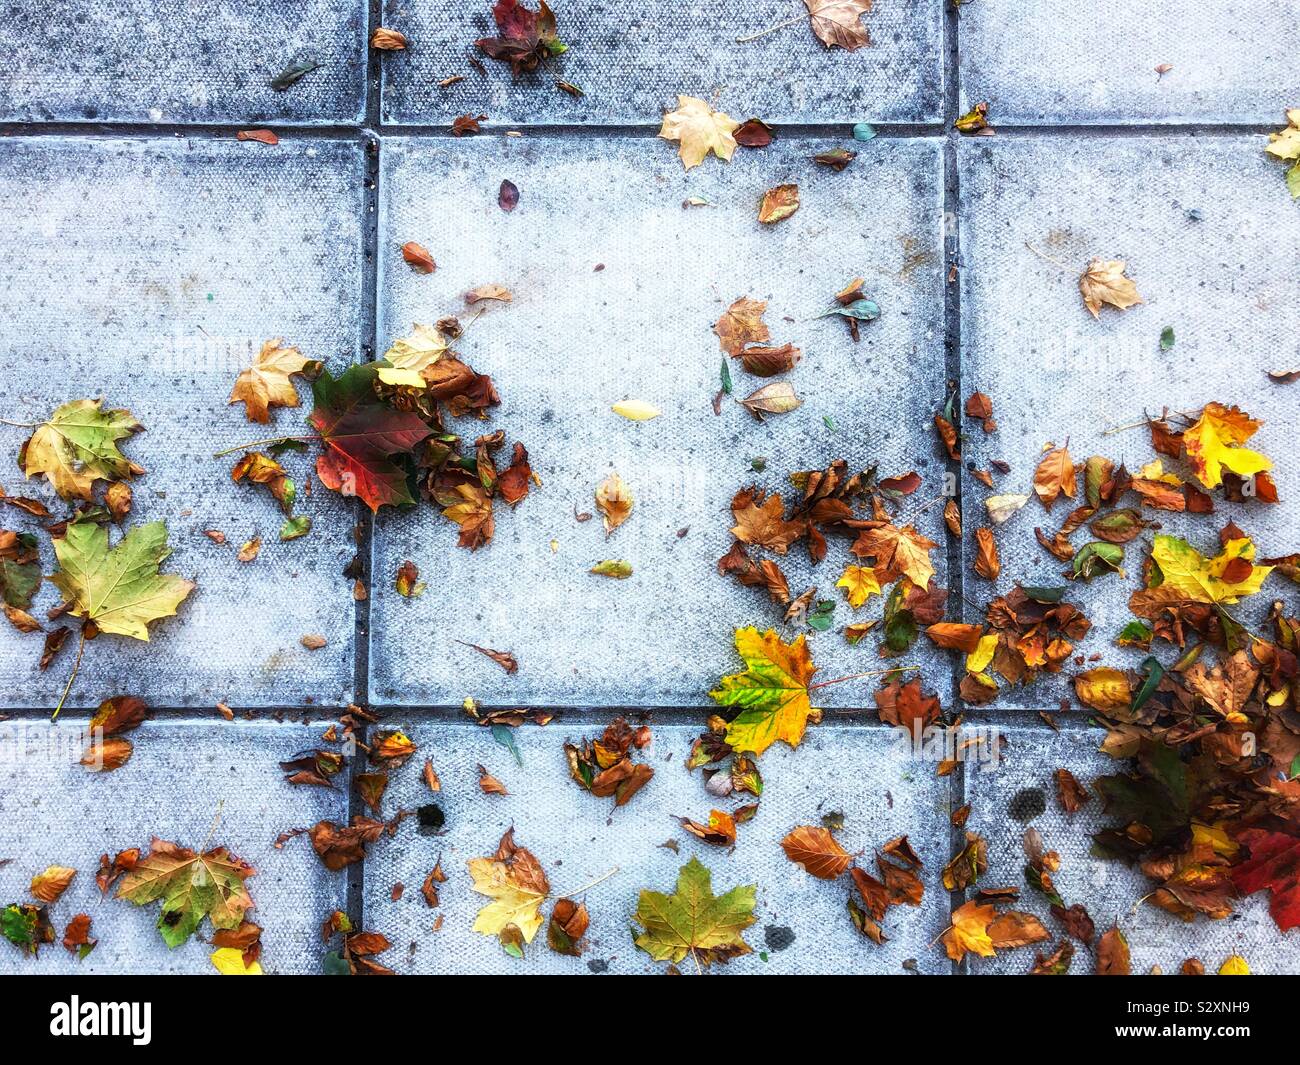 Autumn leaves on square paving slabs Stock Photo